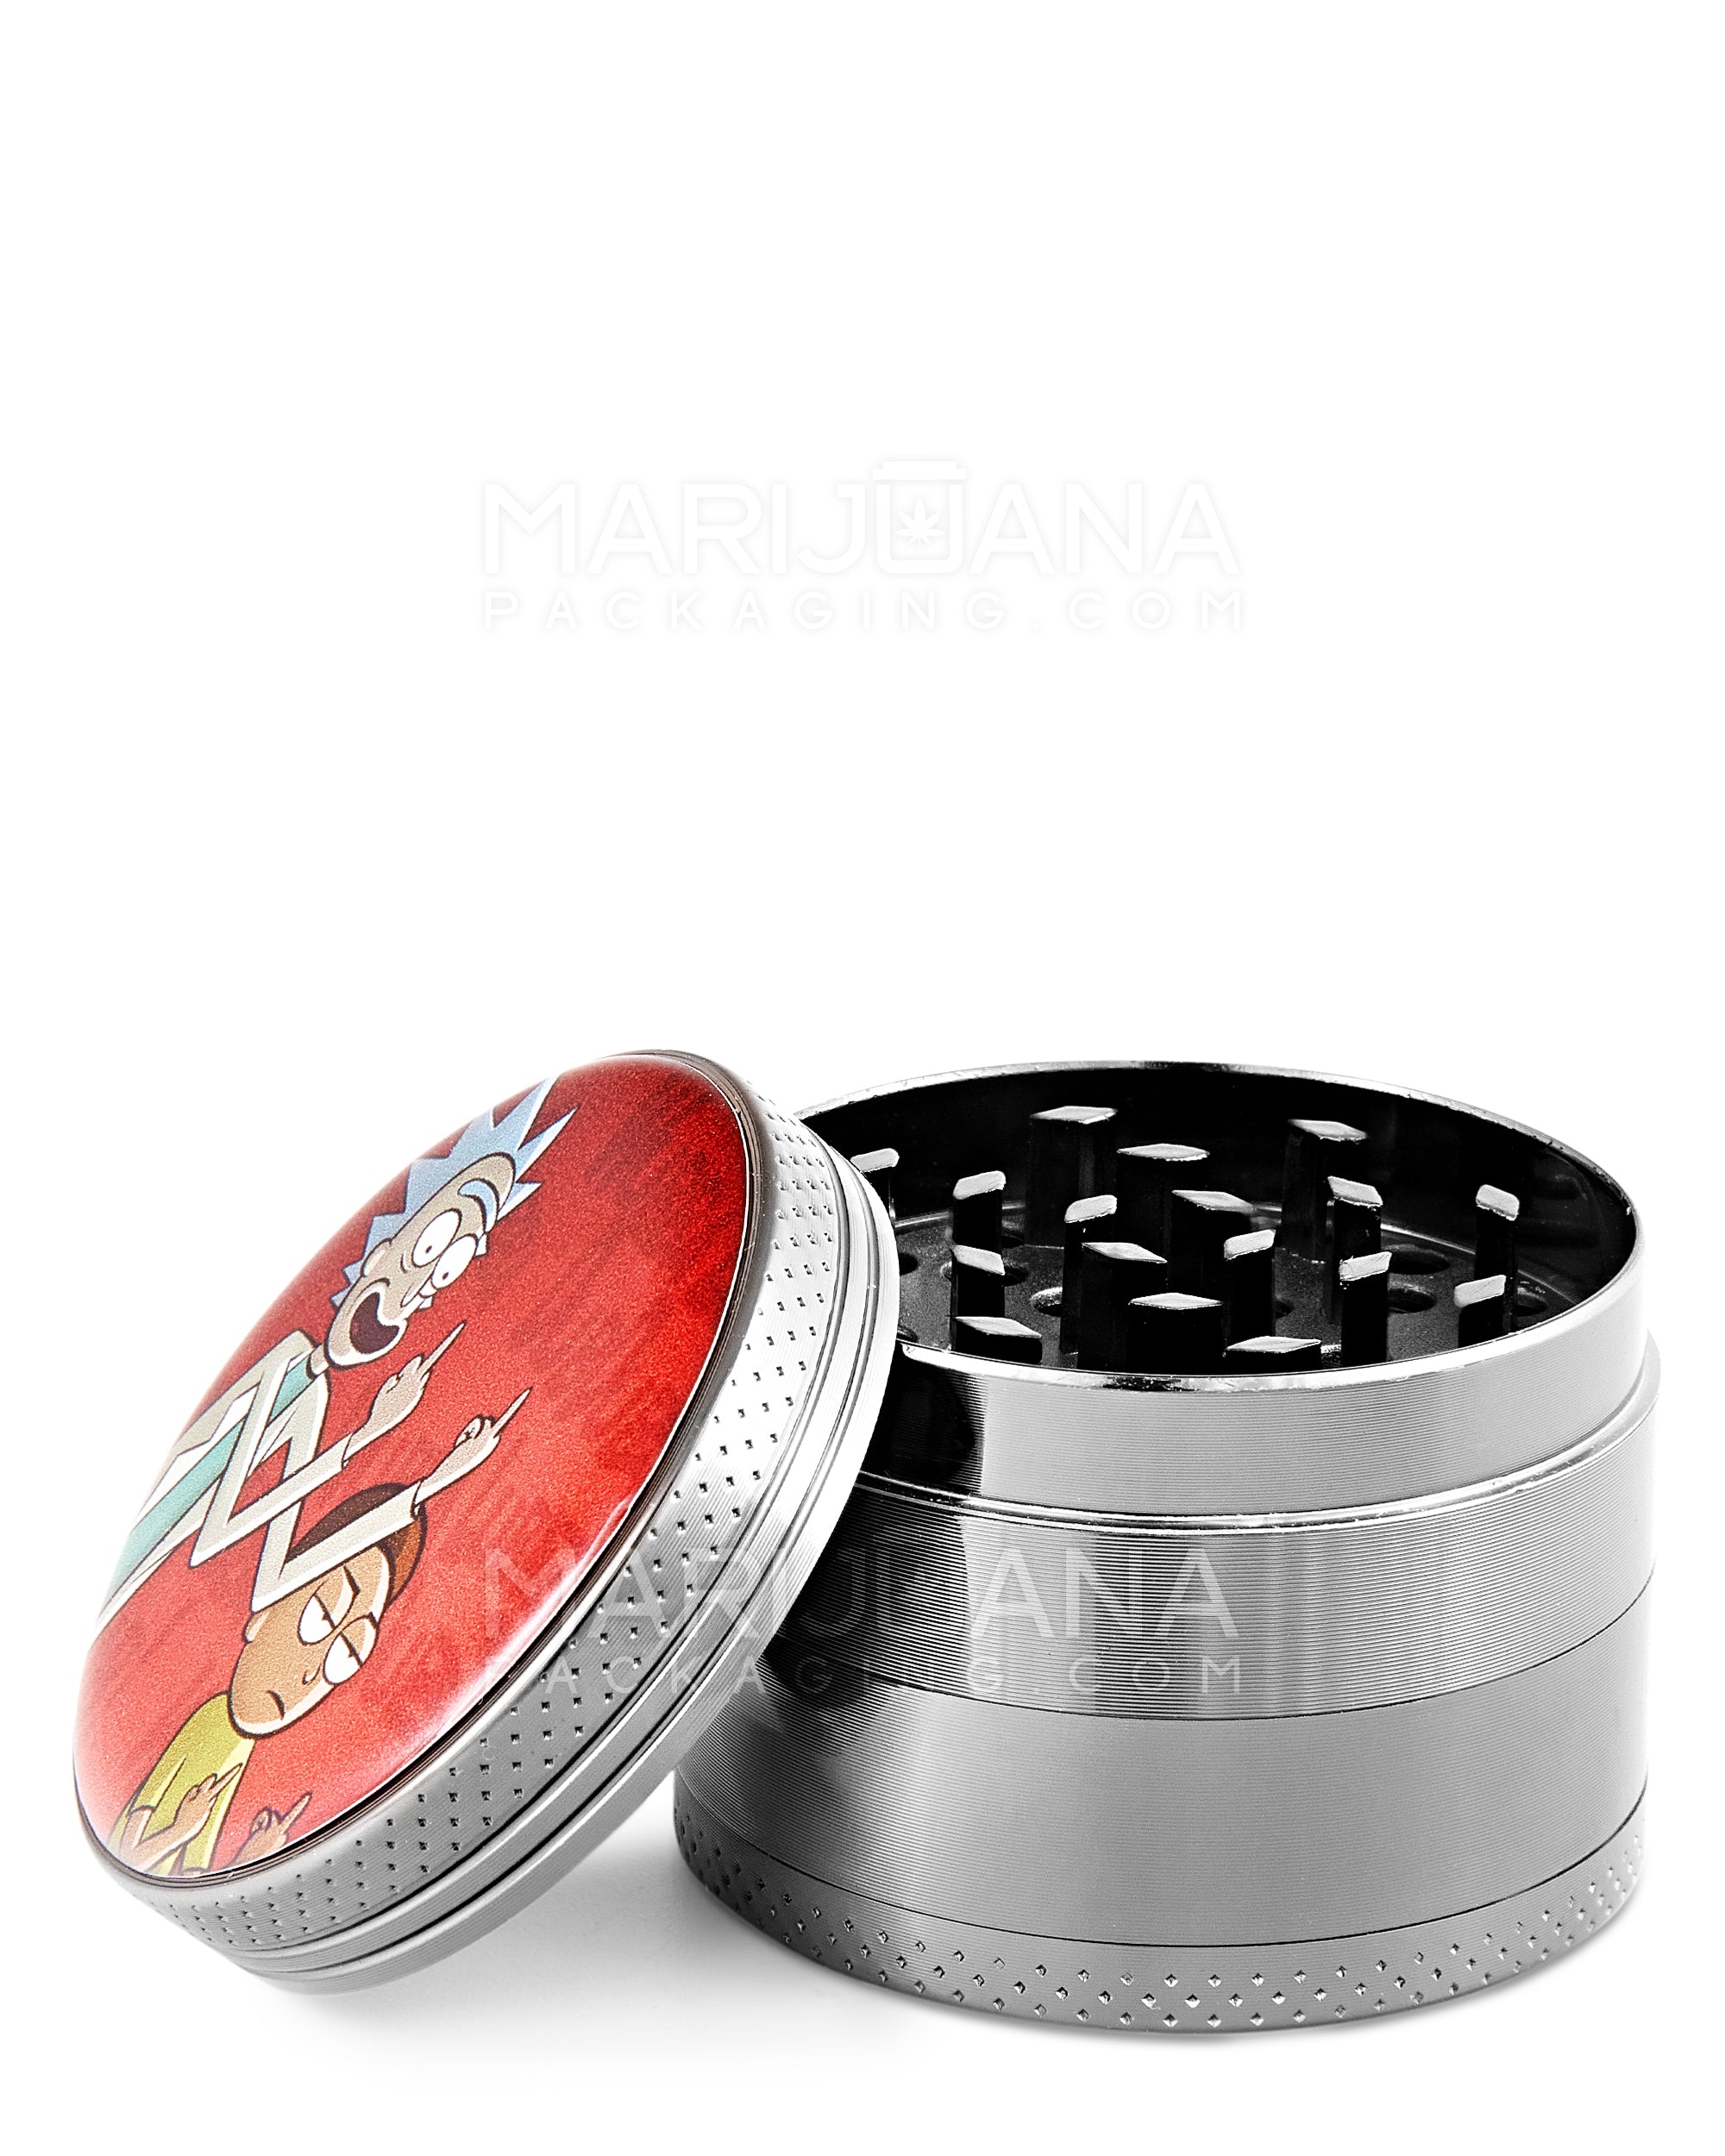 R&M Decal Magnetic Metal Grinder w/ Catcher | 4 Piece - 50mm - Assorted - 8